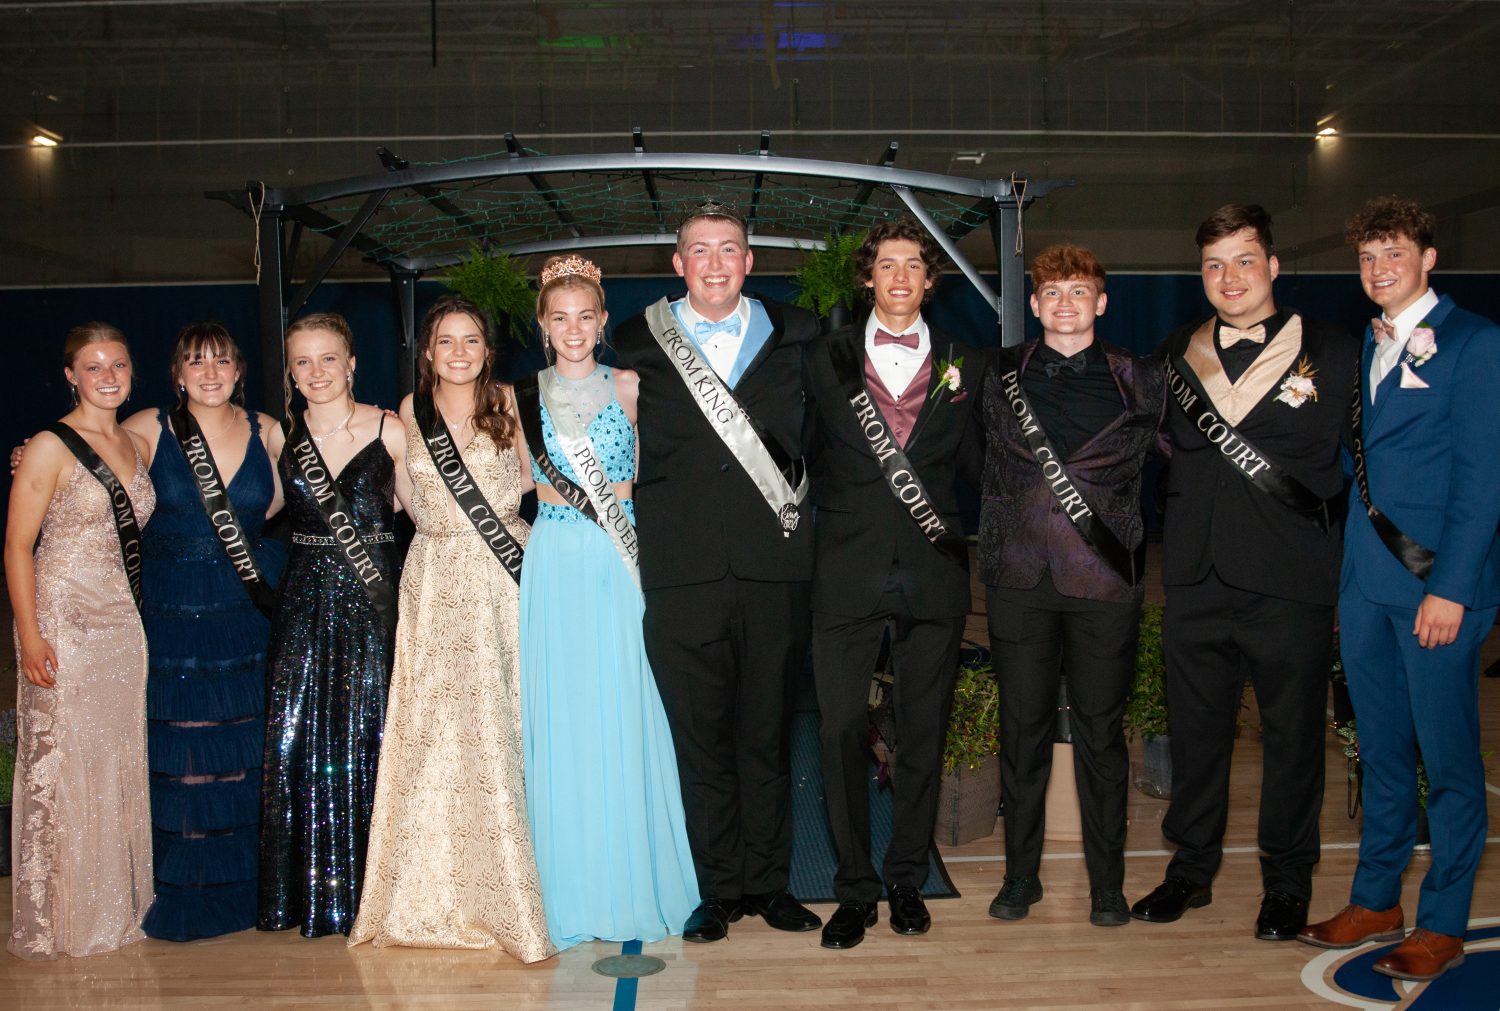 Merrill High School Prom … student royalty is crowned